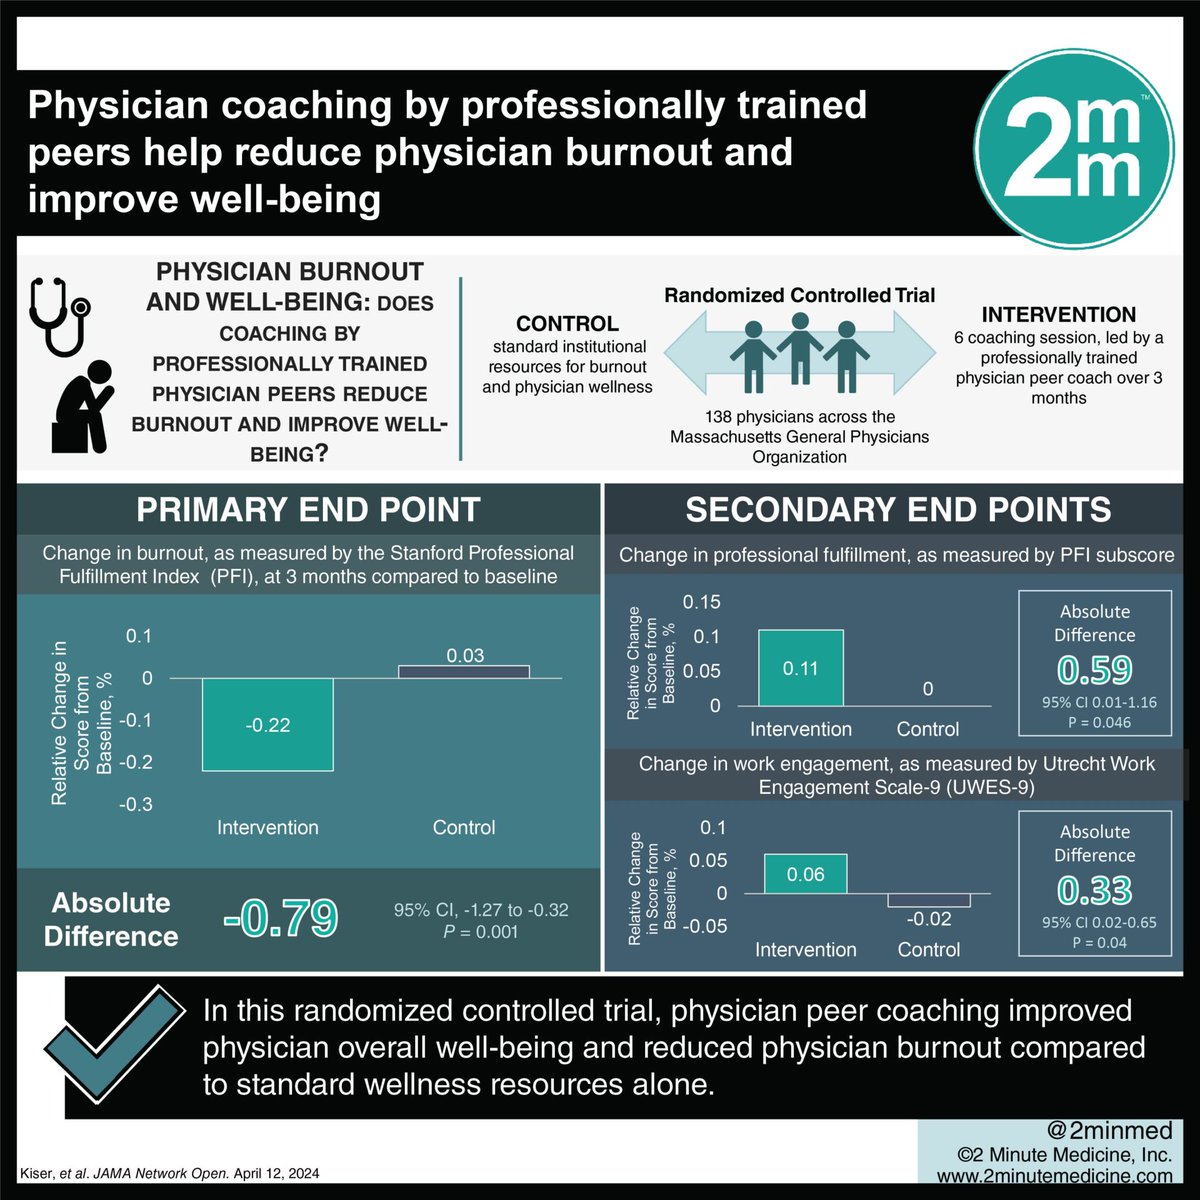 #VisualAbstract: Physician coaching by professionally trained peers help reduce physician burnout and improve well-being dlvr.it/T5Zlp4 #StudyGraphics #burnout